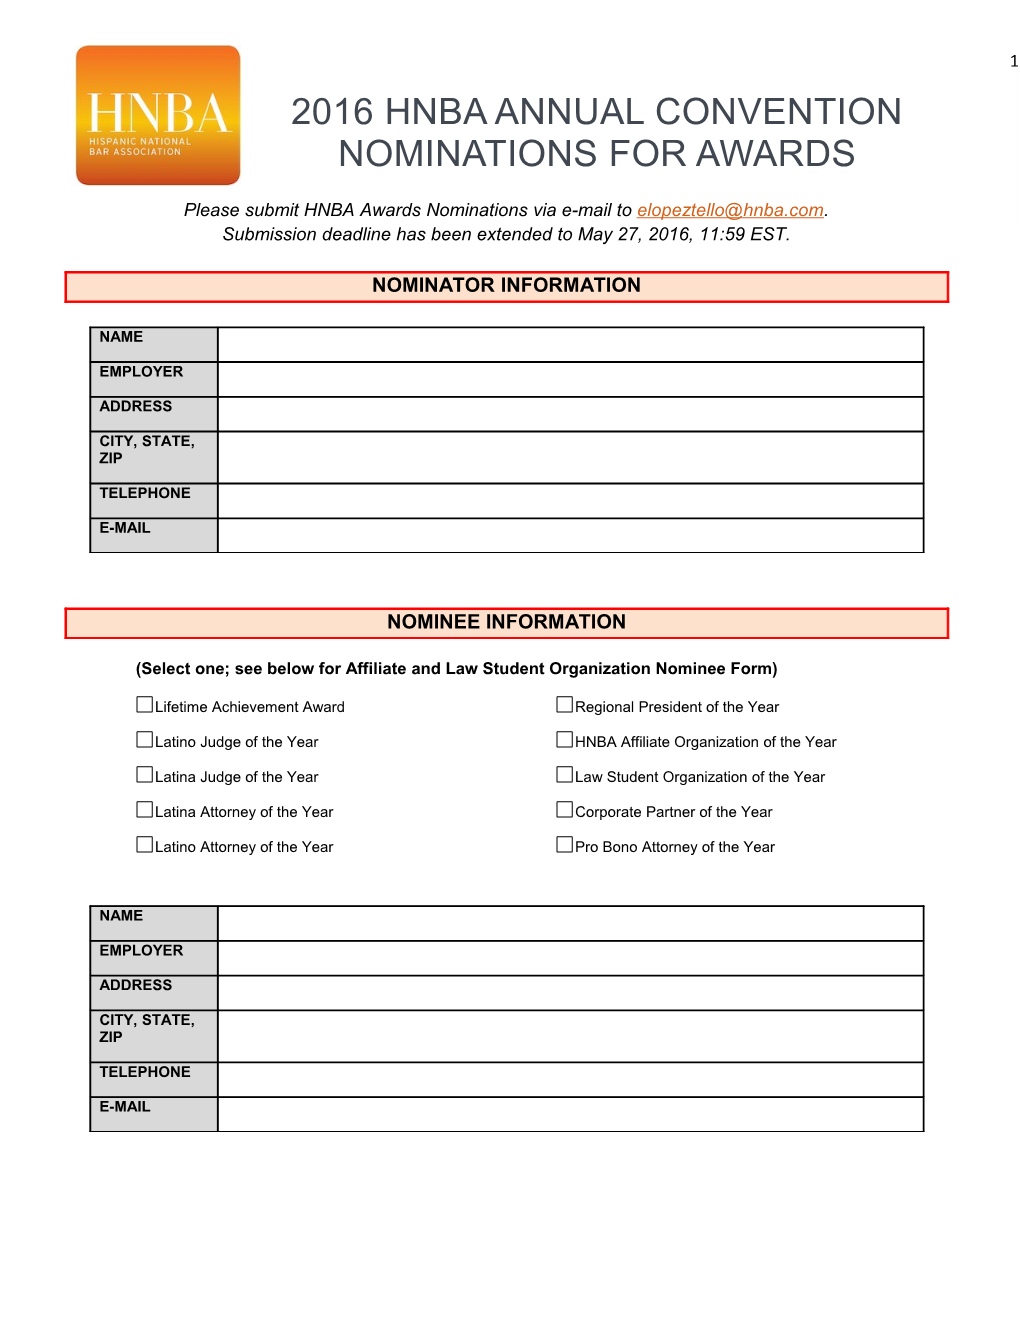 2016 Hnba Annual Convention Nominations for Awards